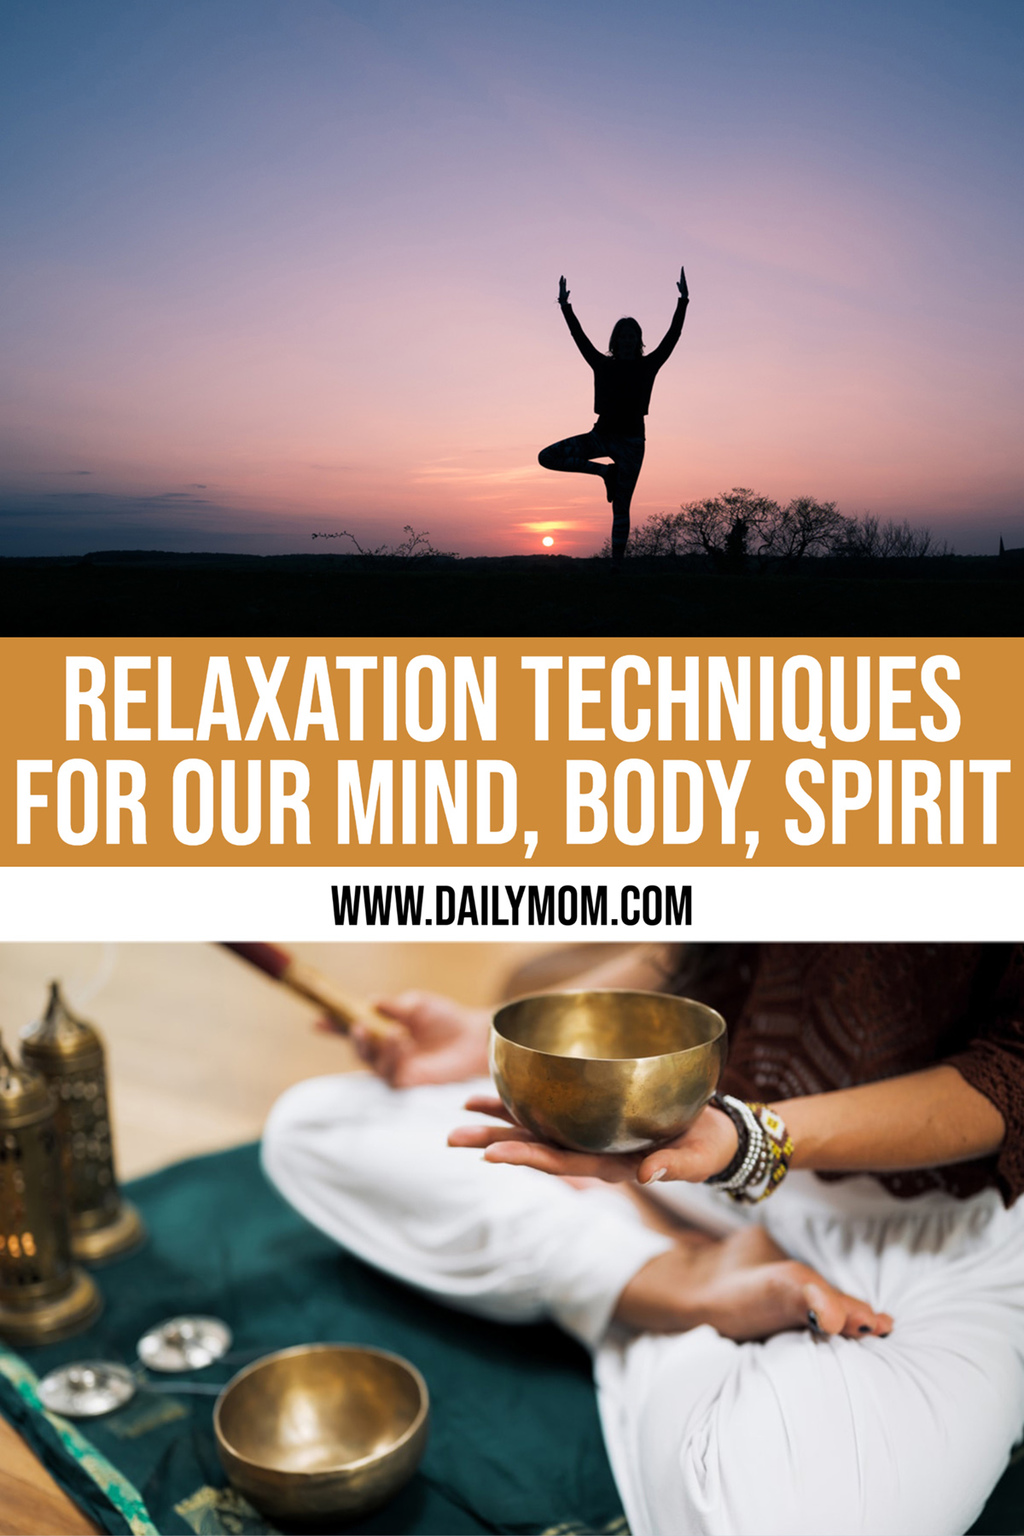 3 Experts Share Alternative Relaxation Techniques To Focus The Mind, Body & Spirit